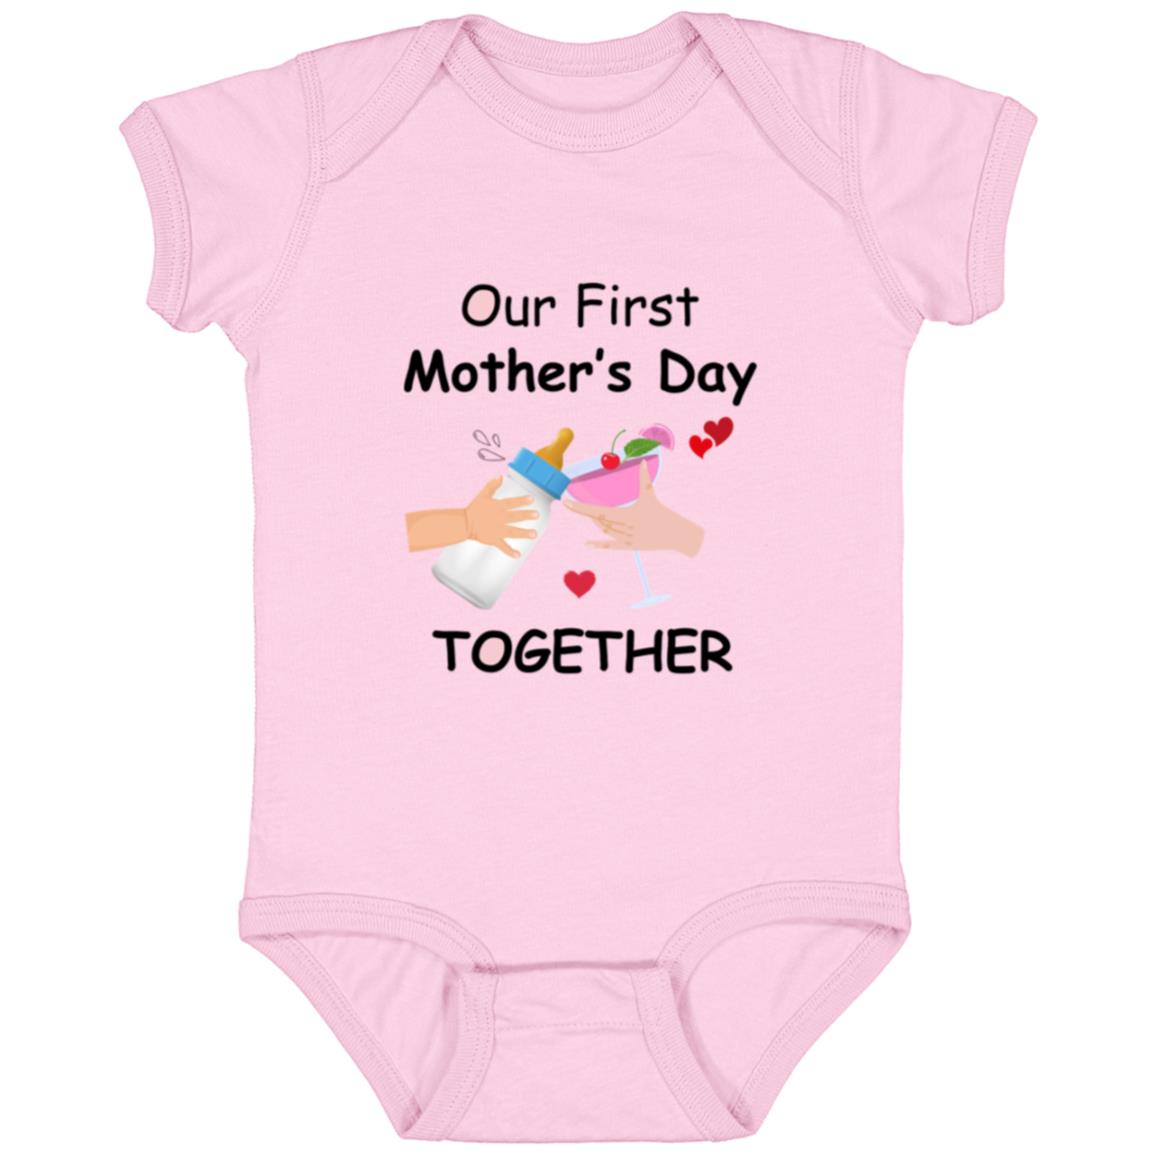 Our First Mother's Day Together | Infant Bodysuit